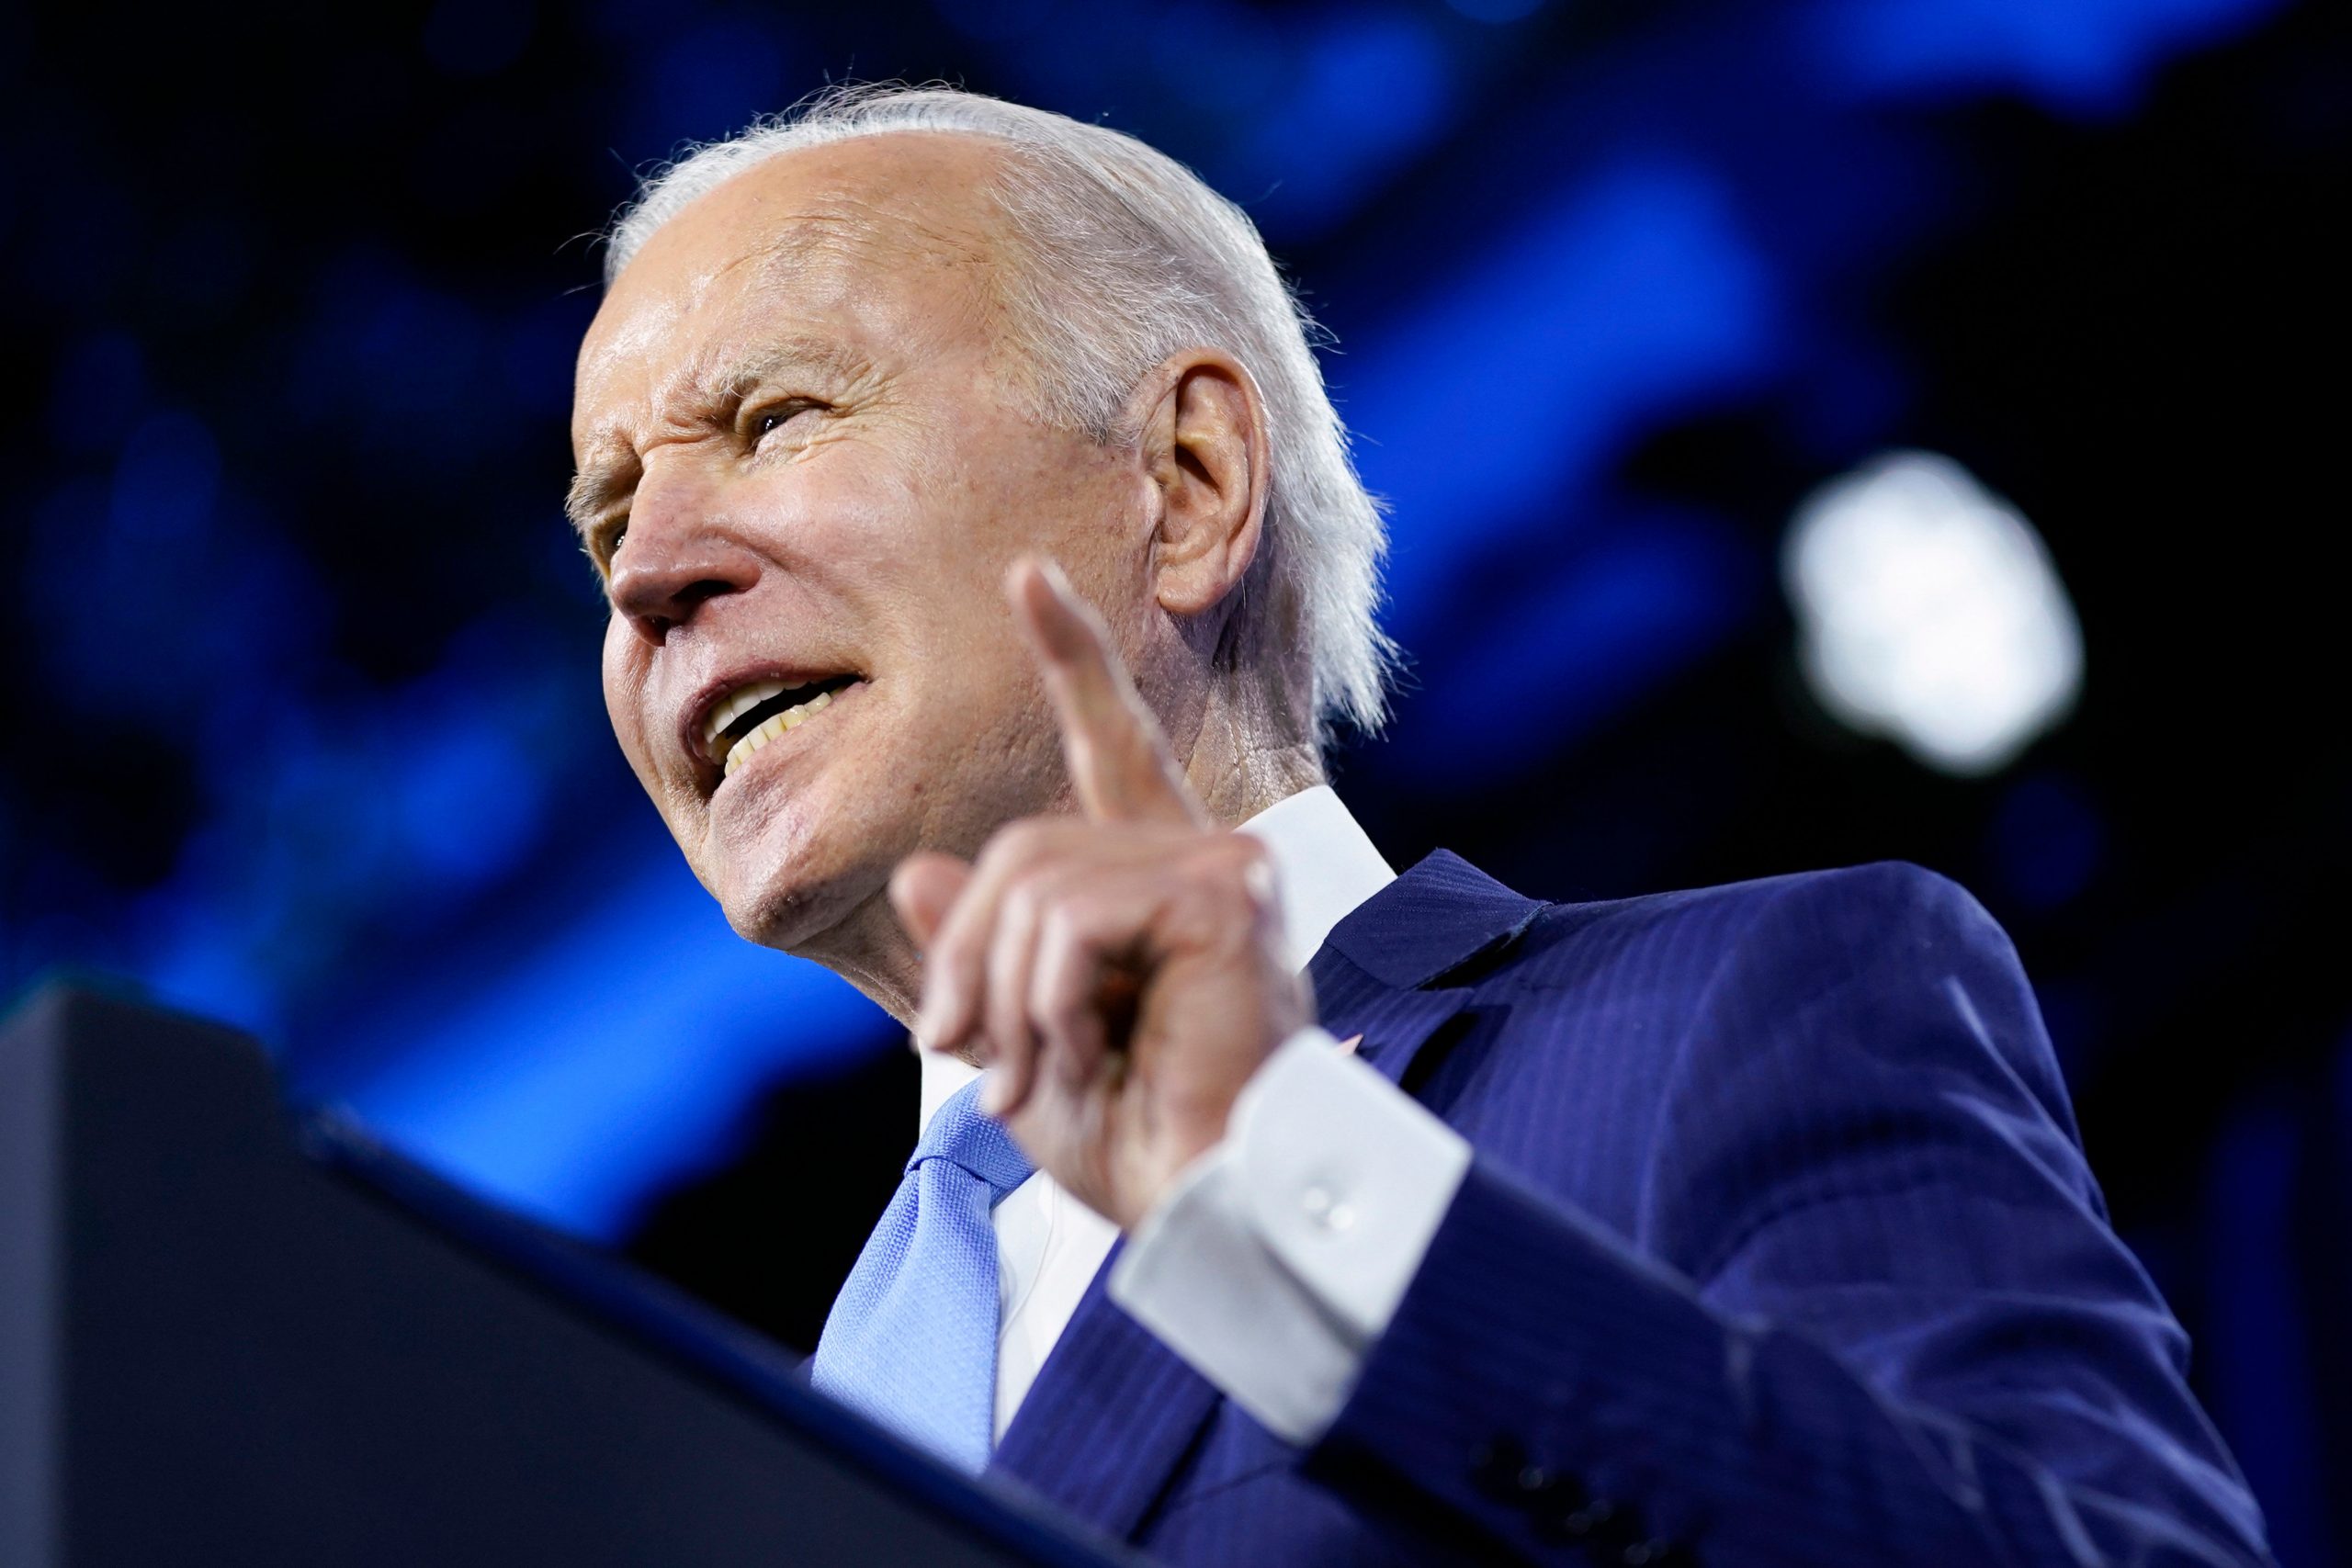 What to expect from US President Joe Biden’s call with China’s Xi Jinping?